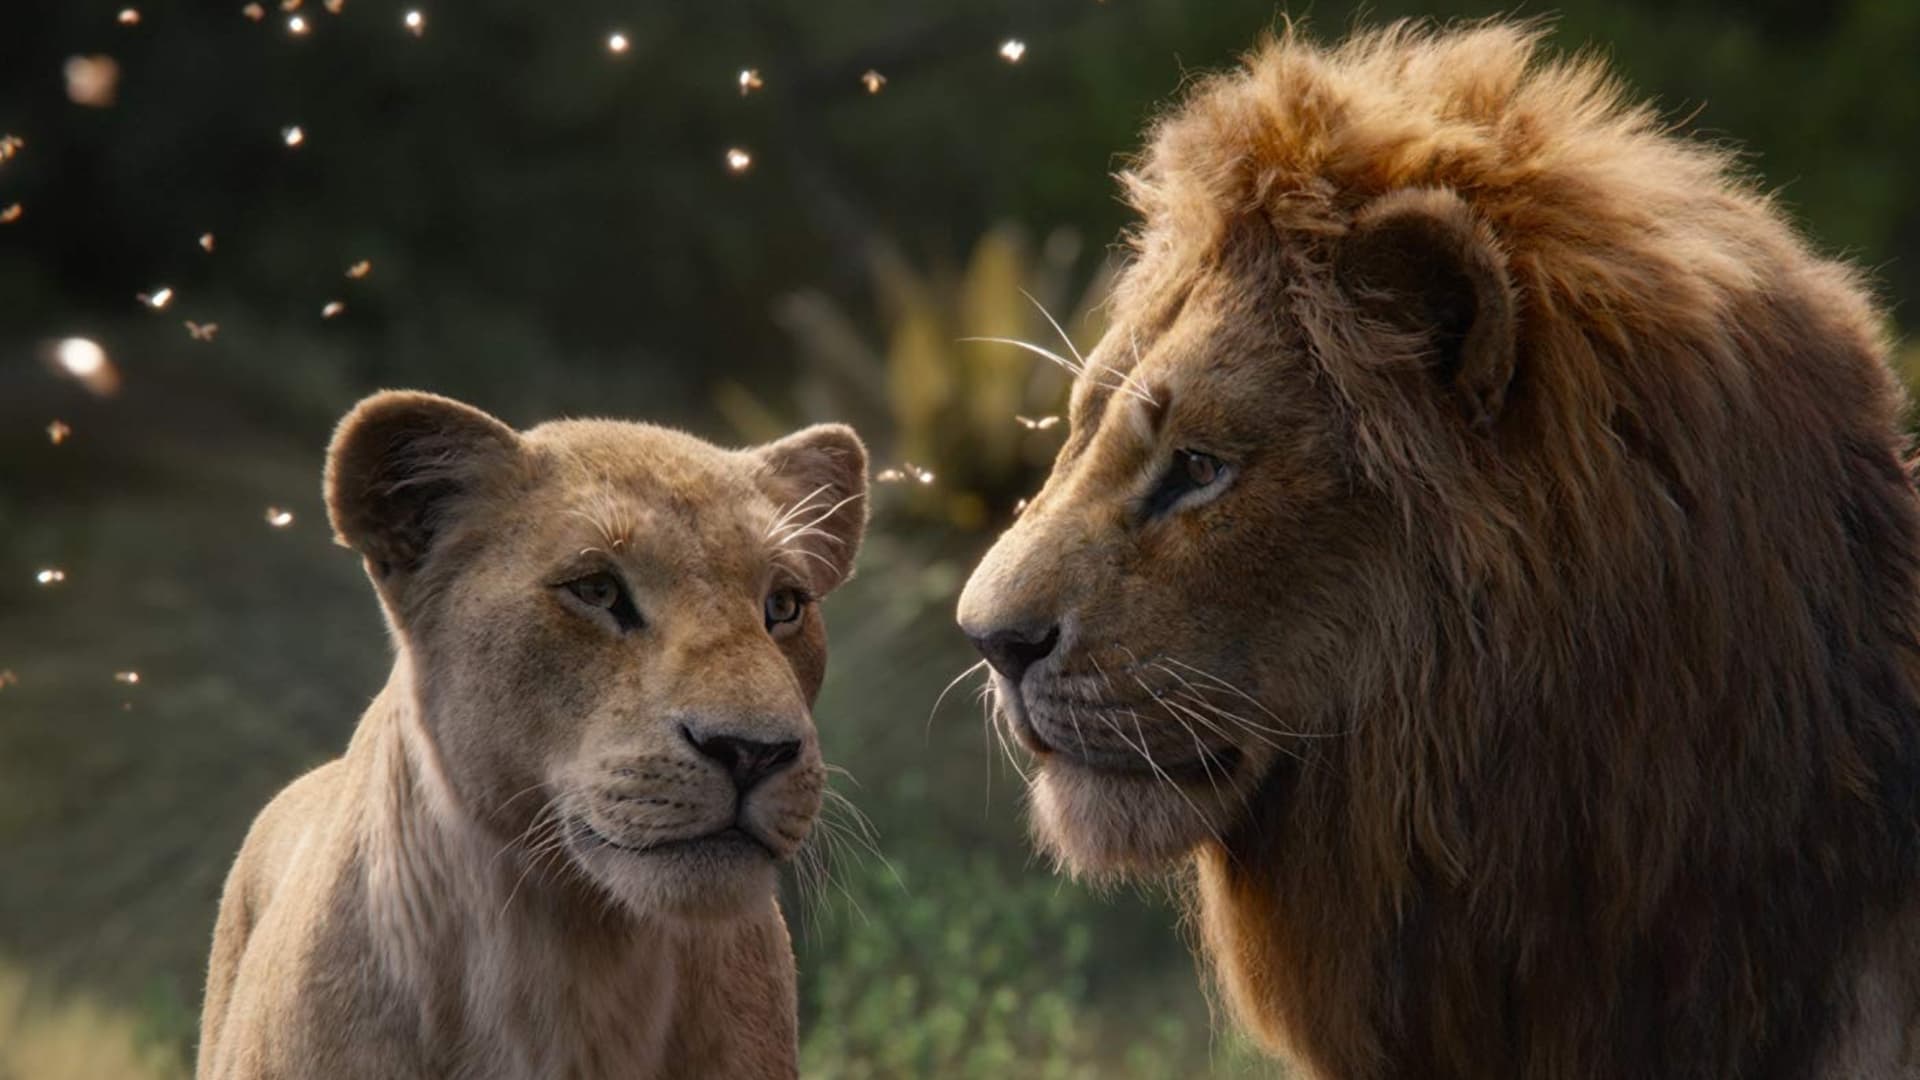 Disney calls 'Lion King' live-action, Golden Globes says its animated